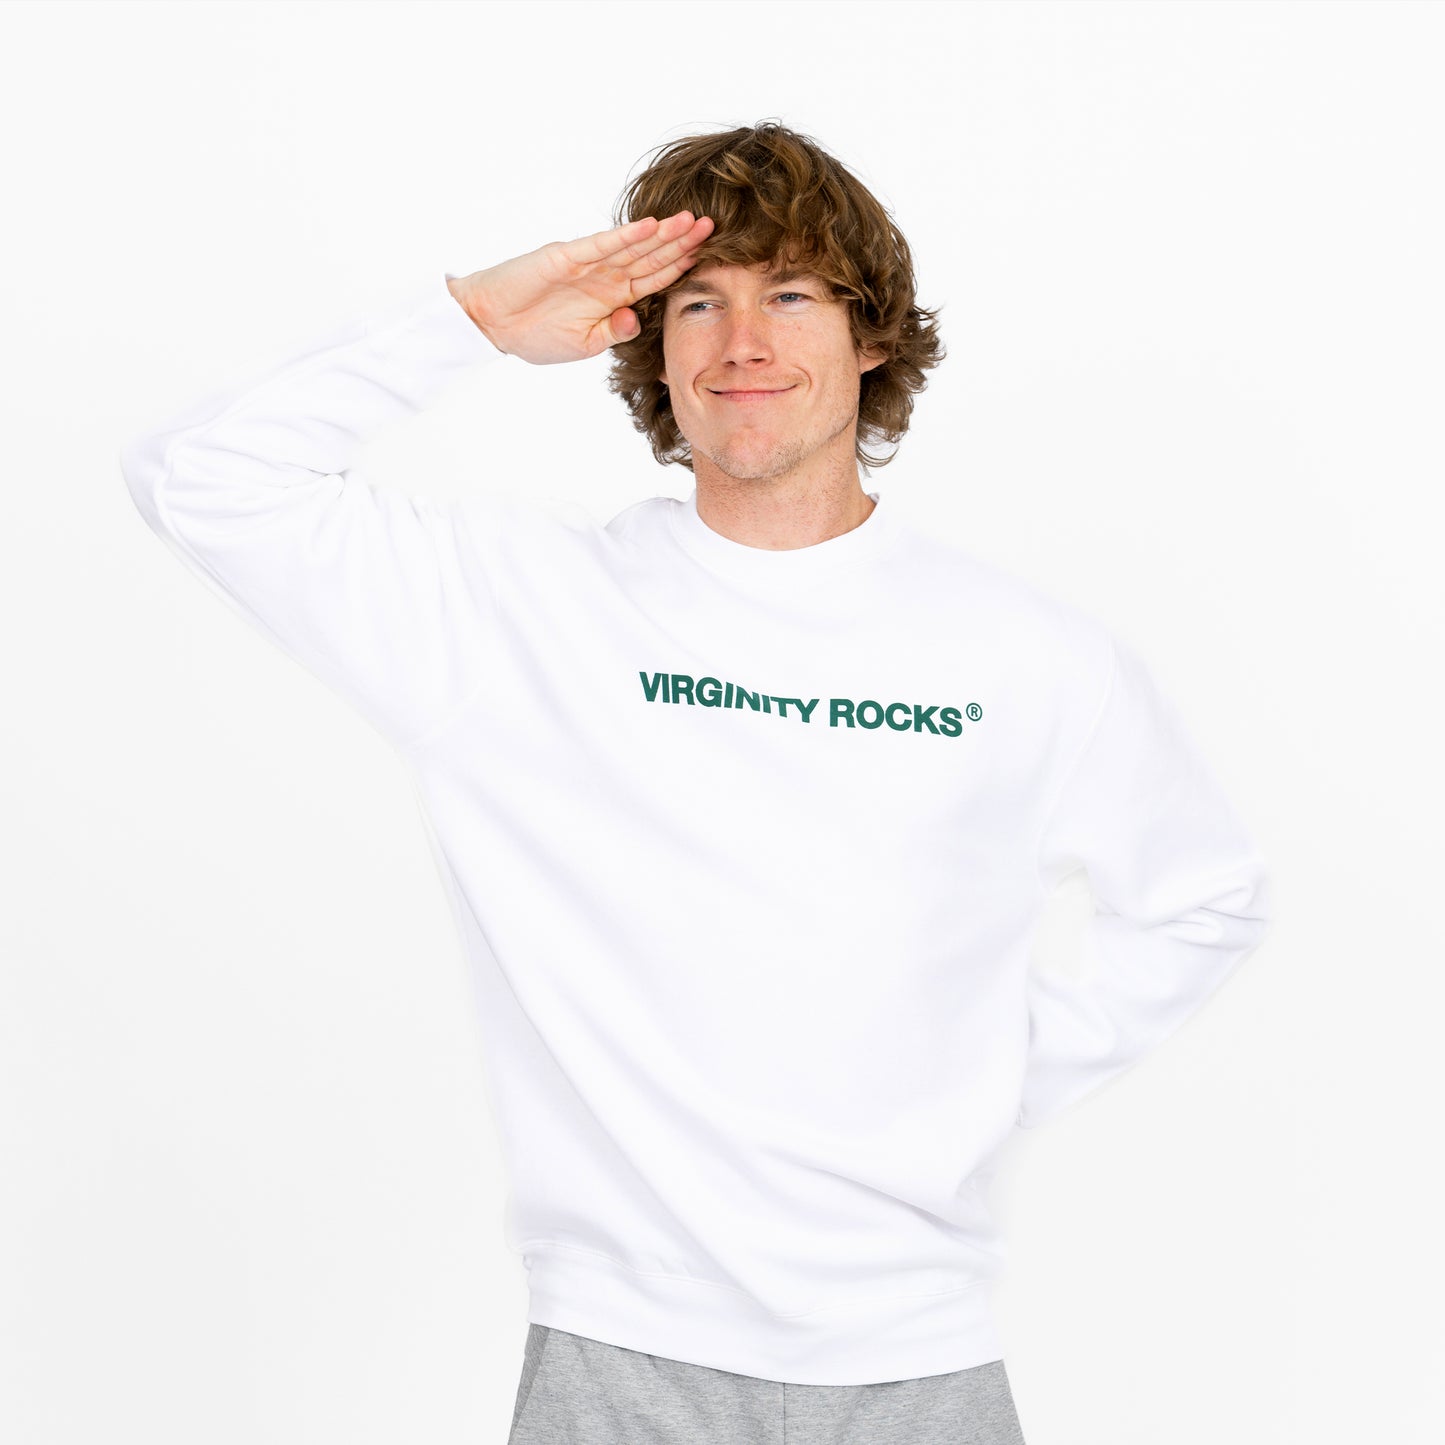 Load image into Gallery viewer, Virginity Rocks Registered White Crewneck
